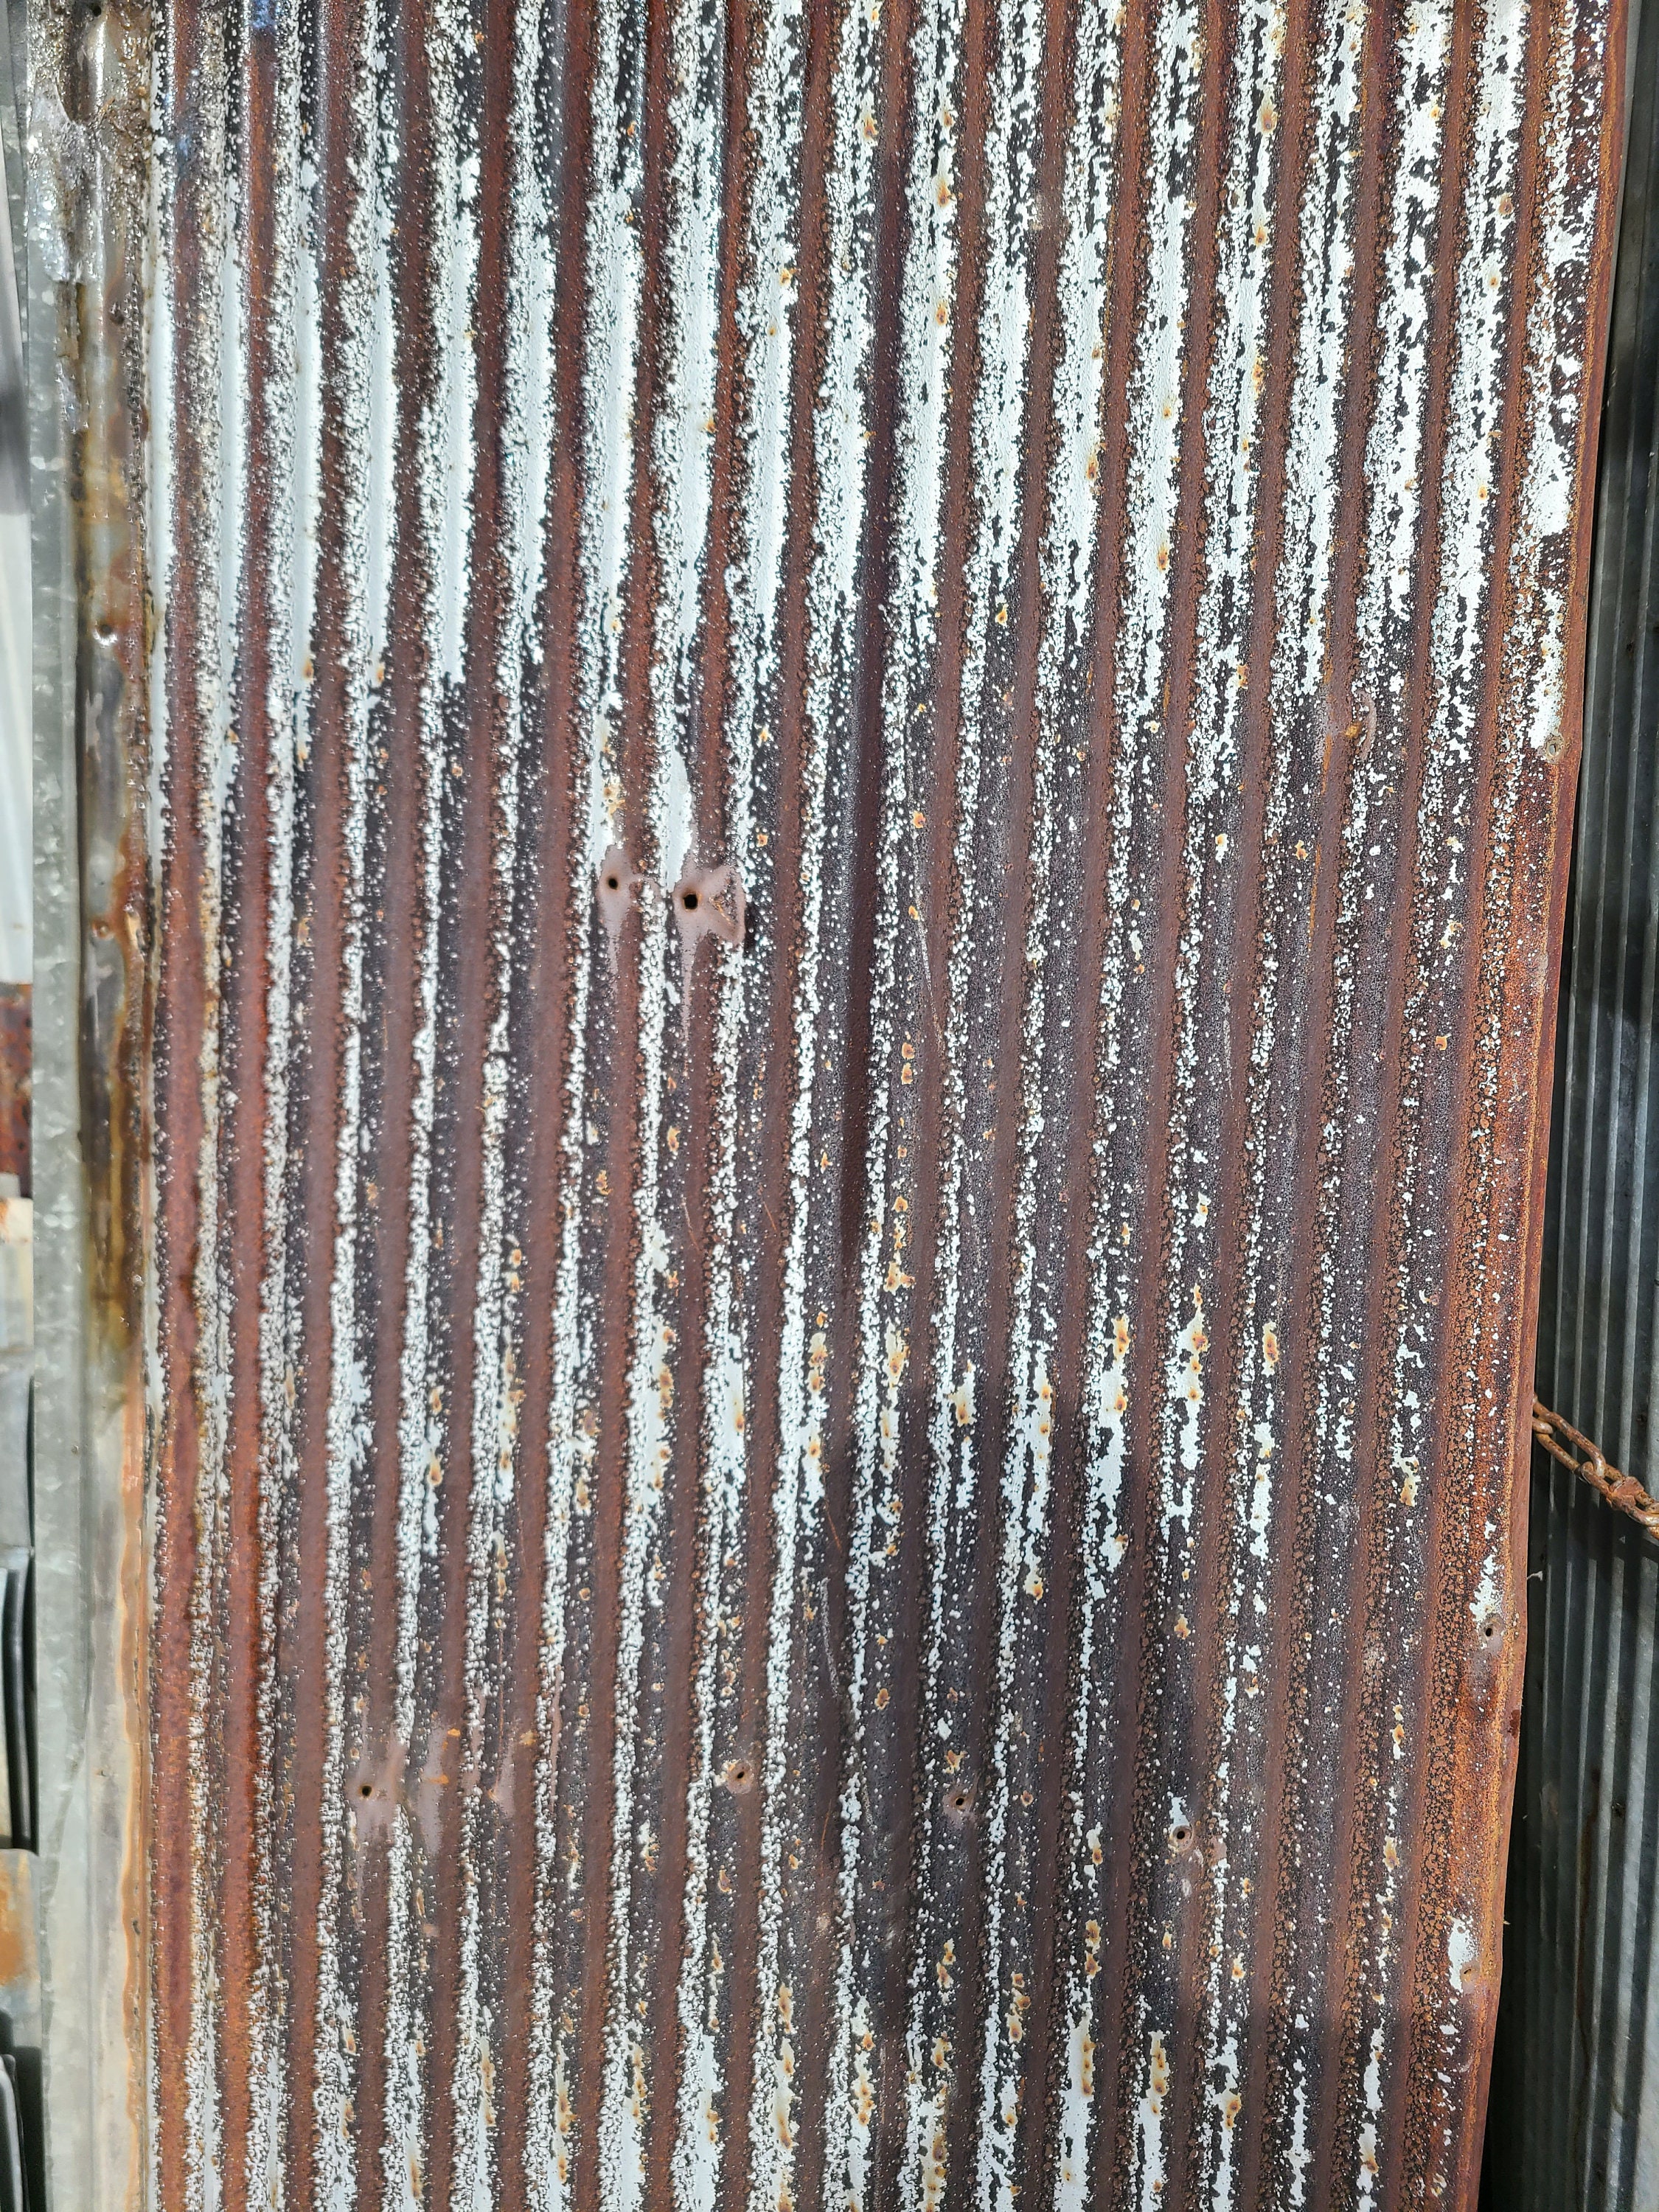 61 Sheets Barn Tin, Corrugated Metal Reclaimed Salvage, 9' Long 1098 Sq Ft,  A53 